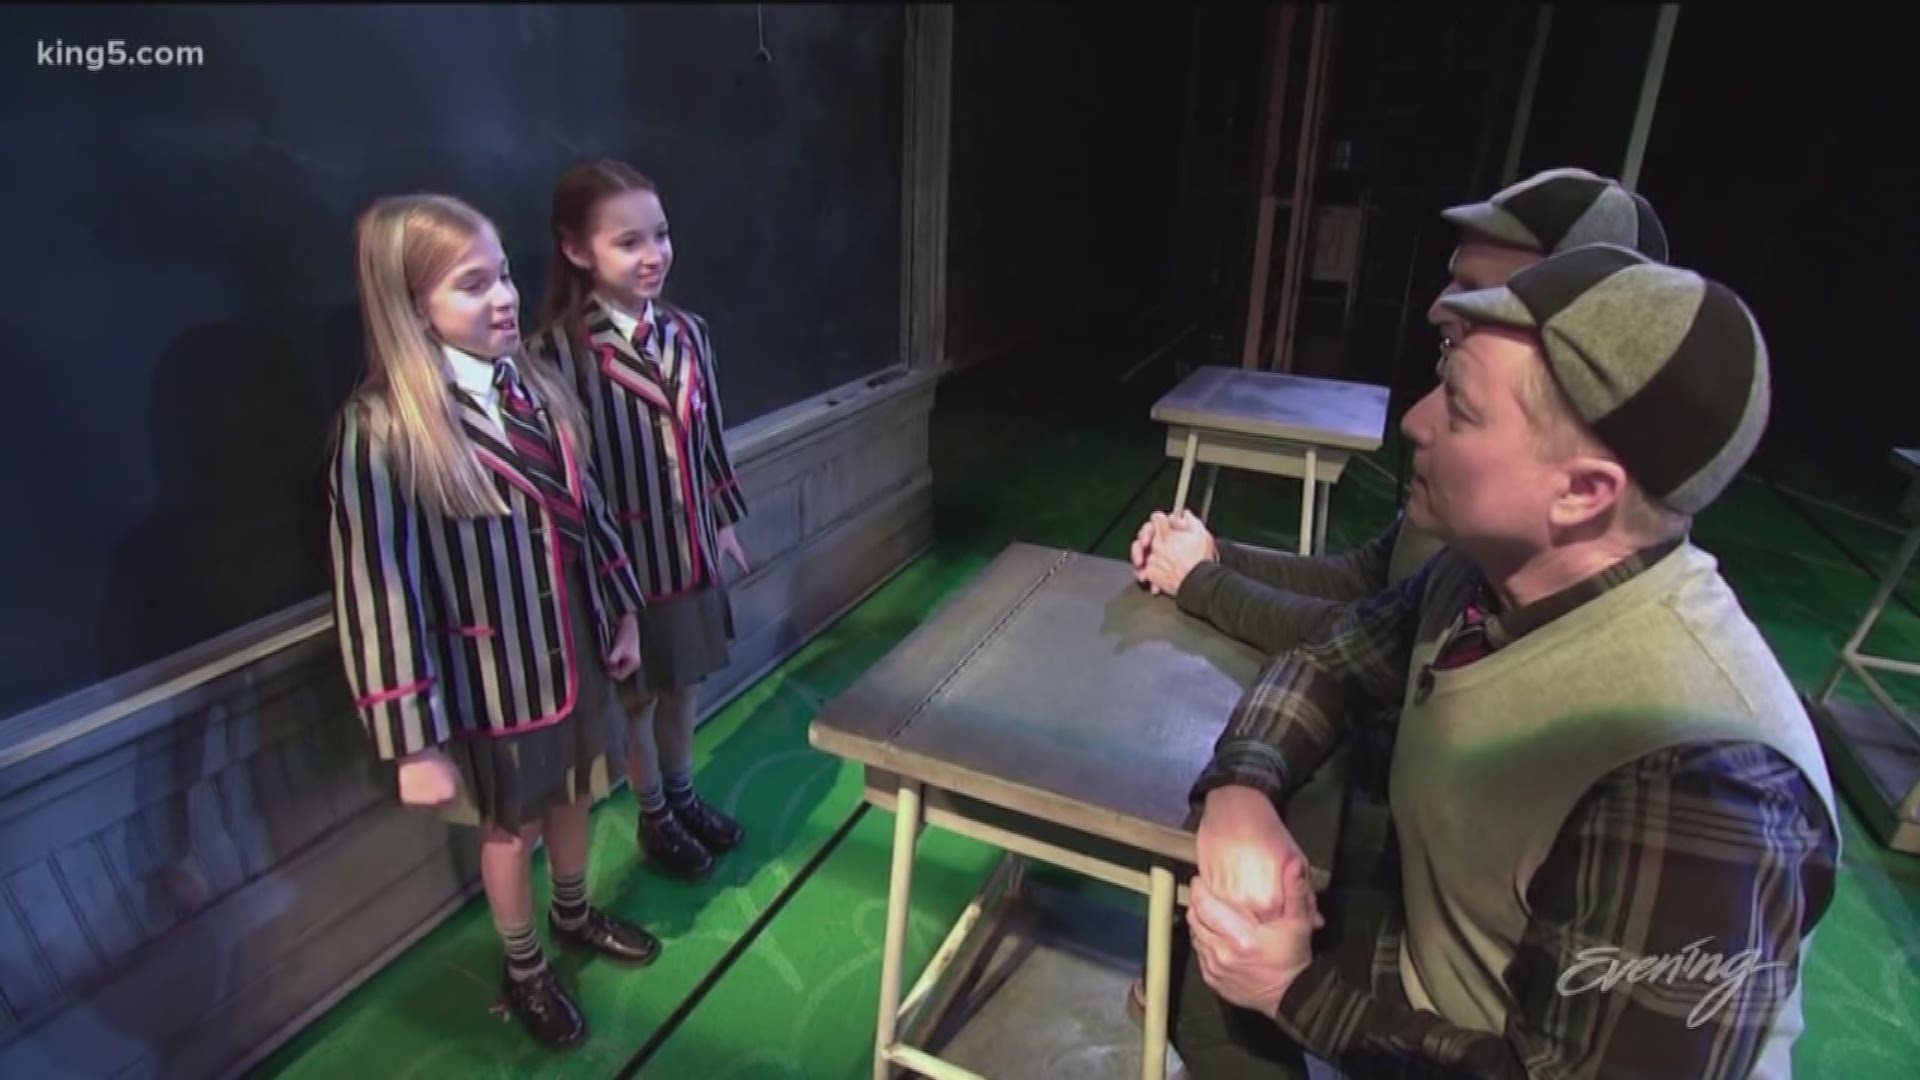 Nava Ruthfield and Holly Reichart, aka Matilda, teach us some much-needed acting techniques that they use themselves to warm up before a show.